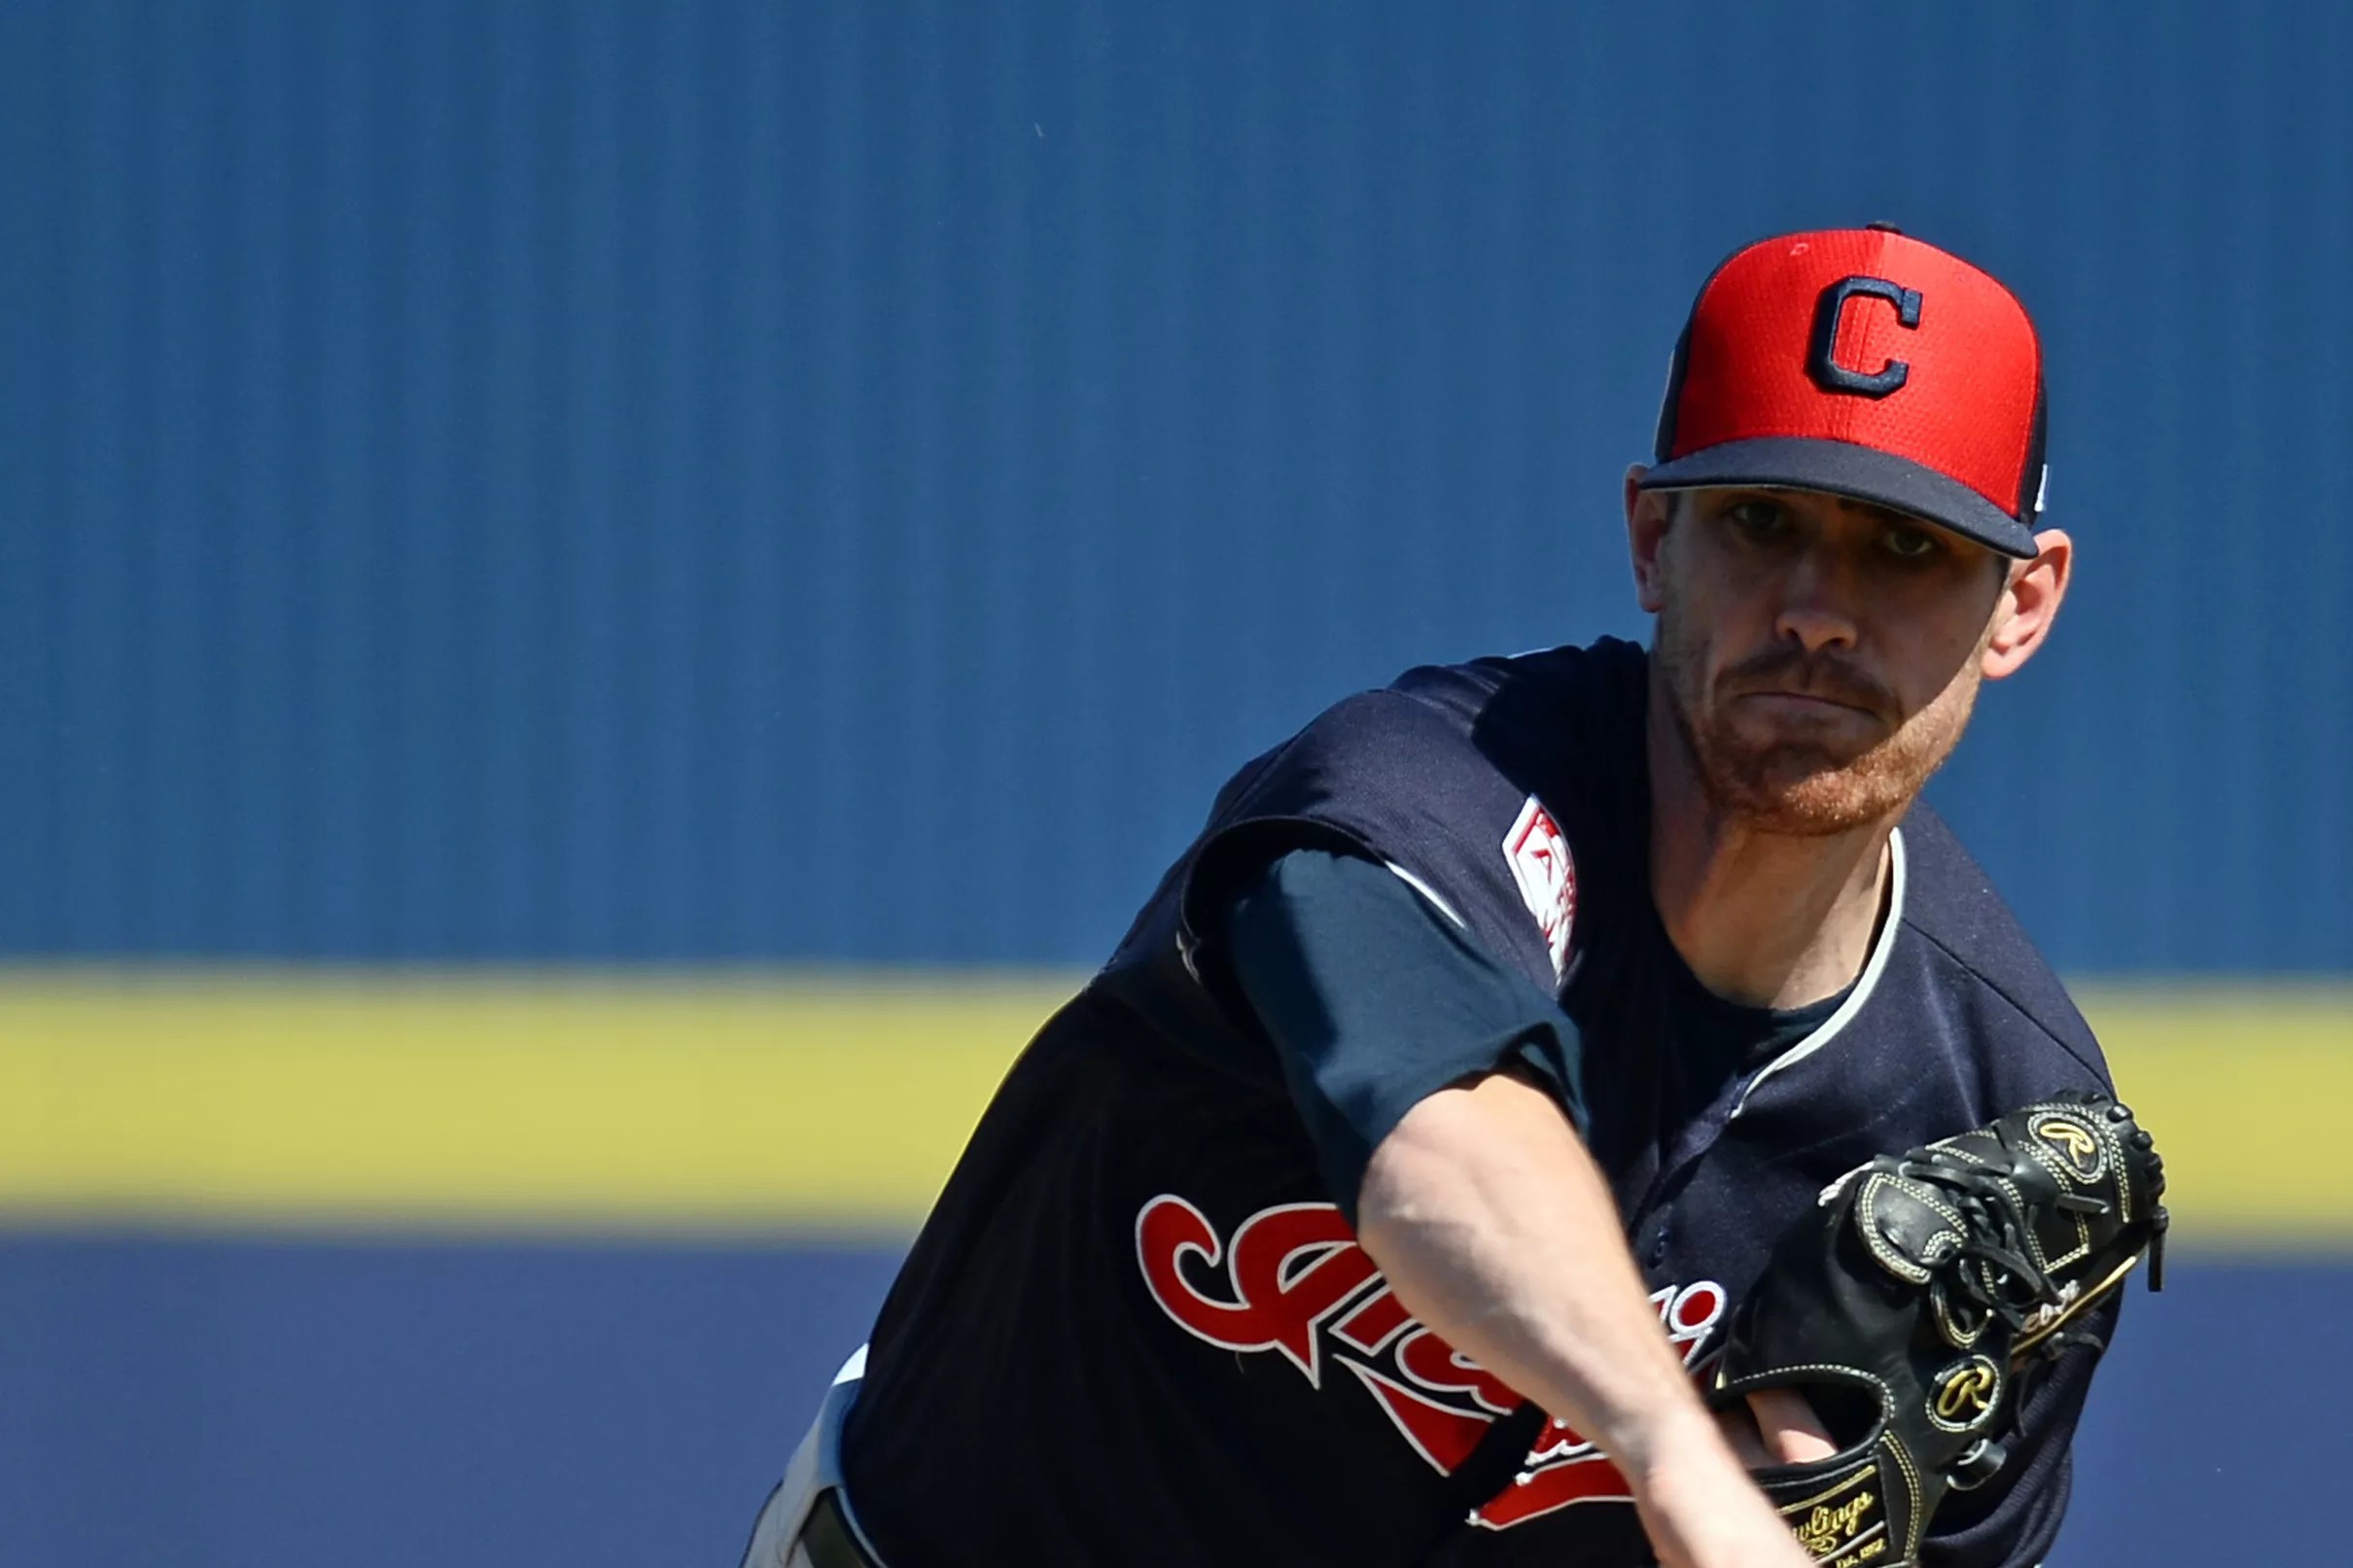 Shane Bieber looking forward to full season with Cleveland